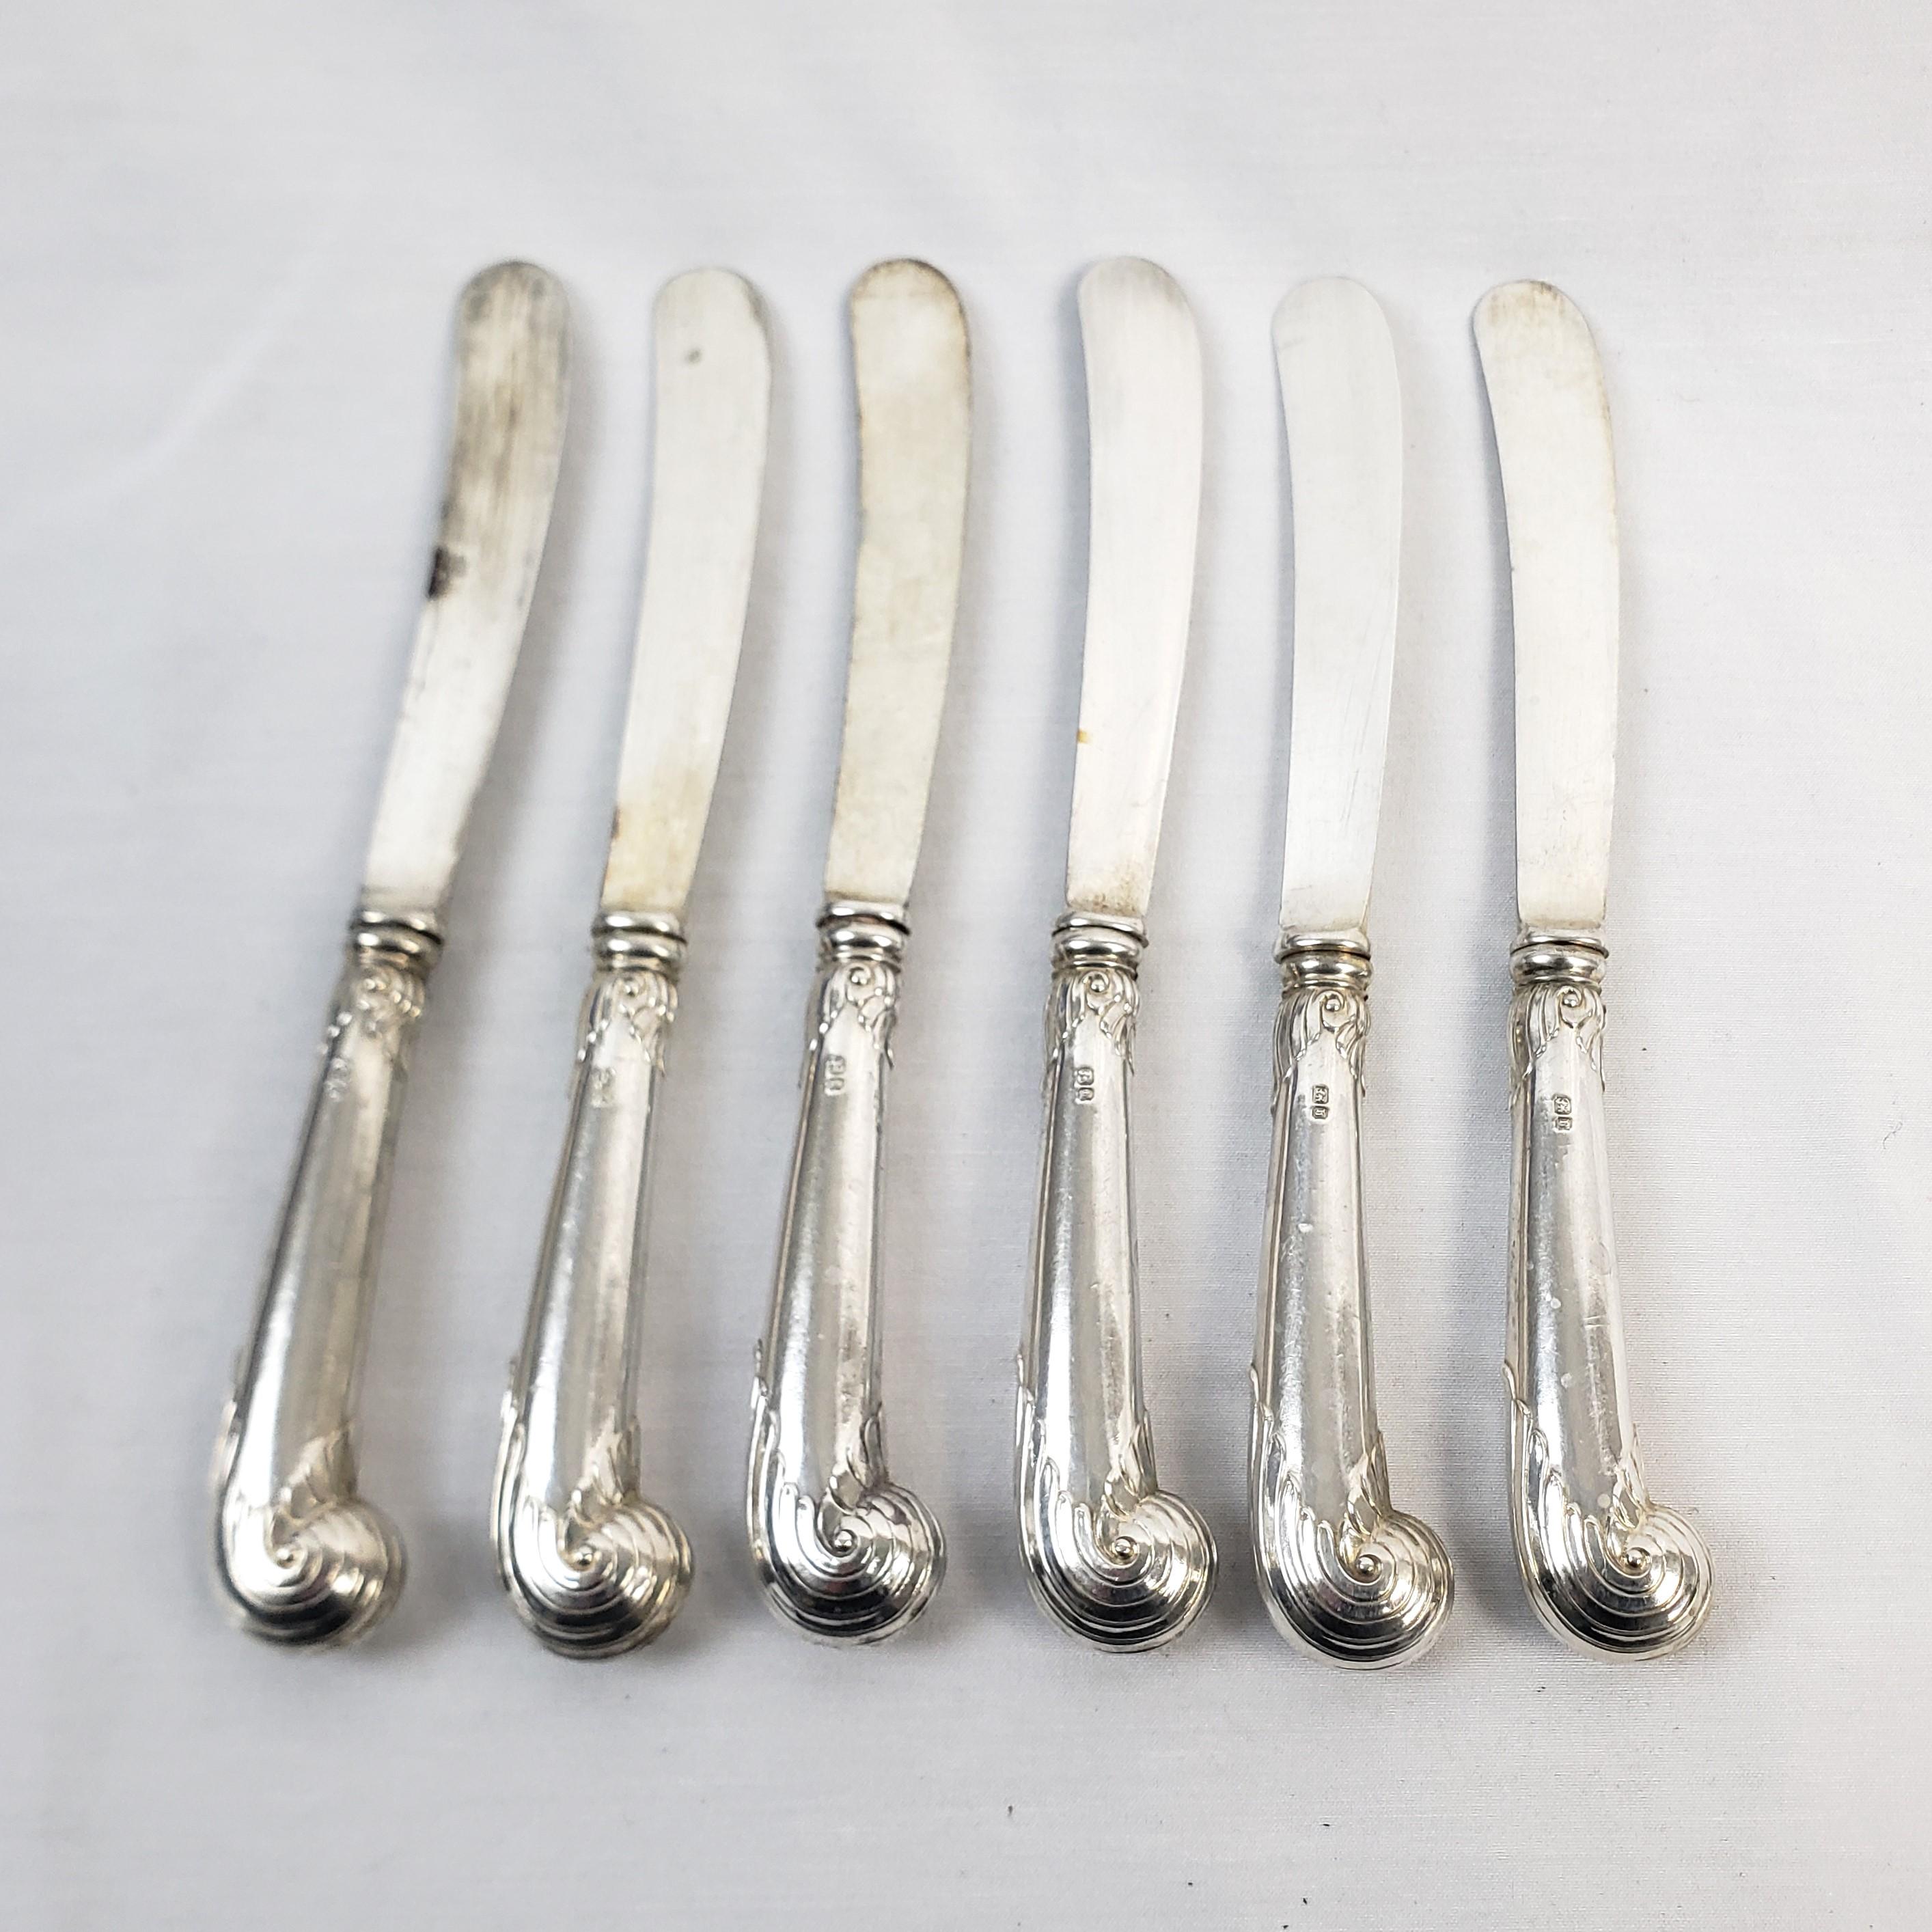 Antique Sterling Silver Pistol Handled Desert Knife & Fork Set in Fitted Case In Good Condition For Sale In Hamilton, Ontario